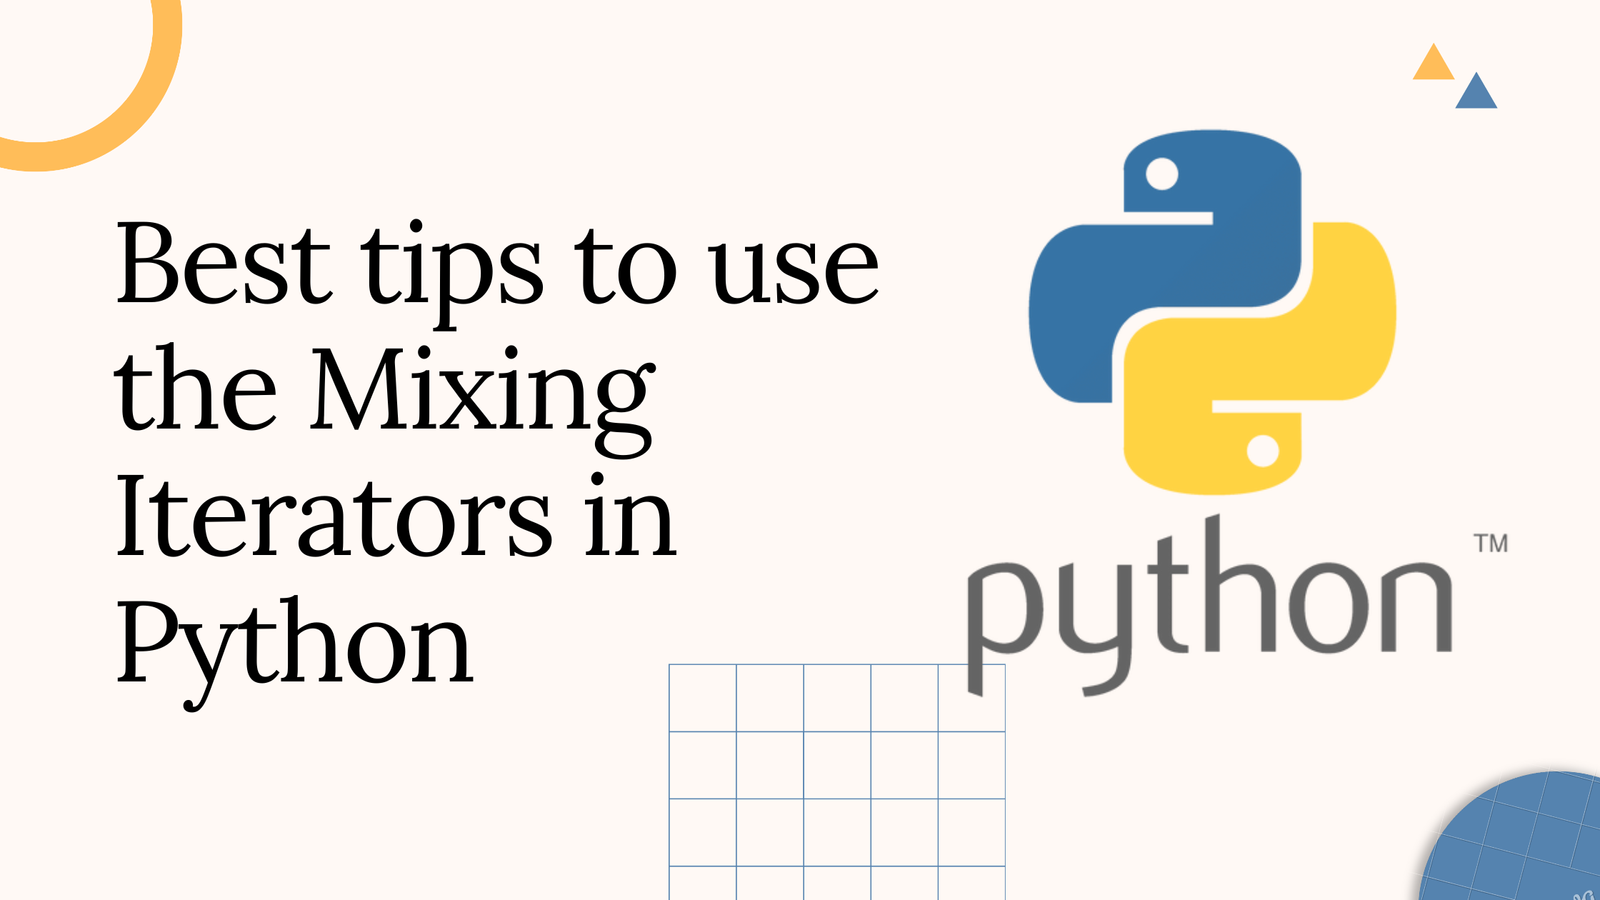 Best tips to use the Mixing Iterators in Python